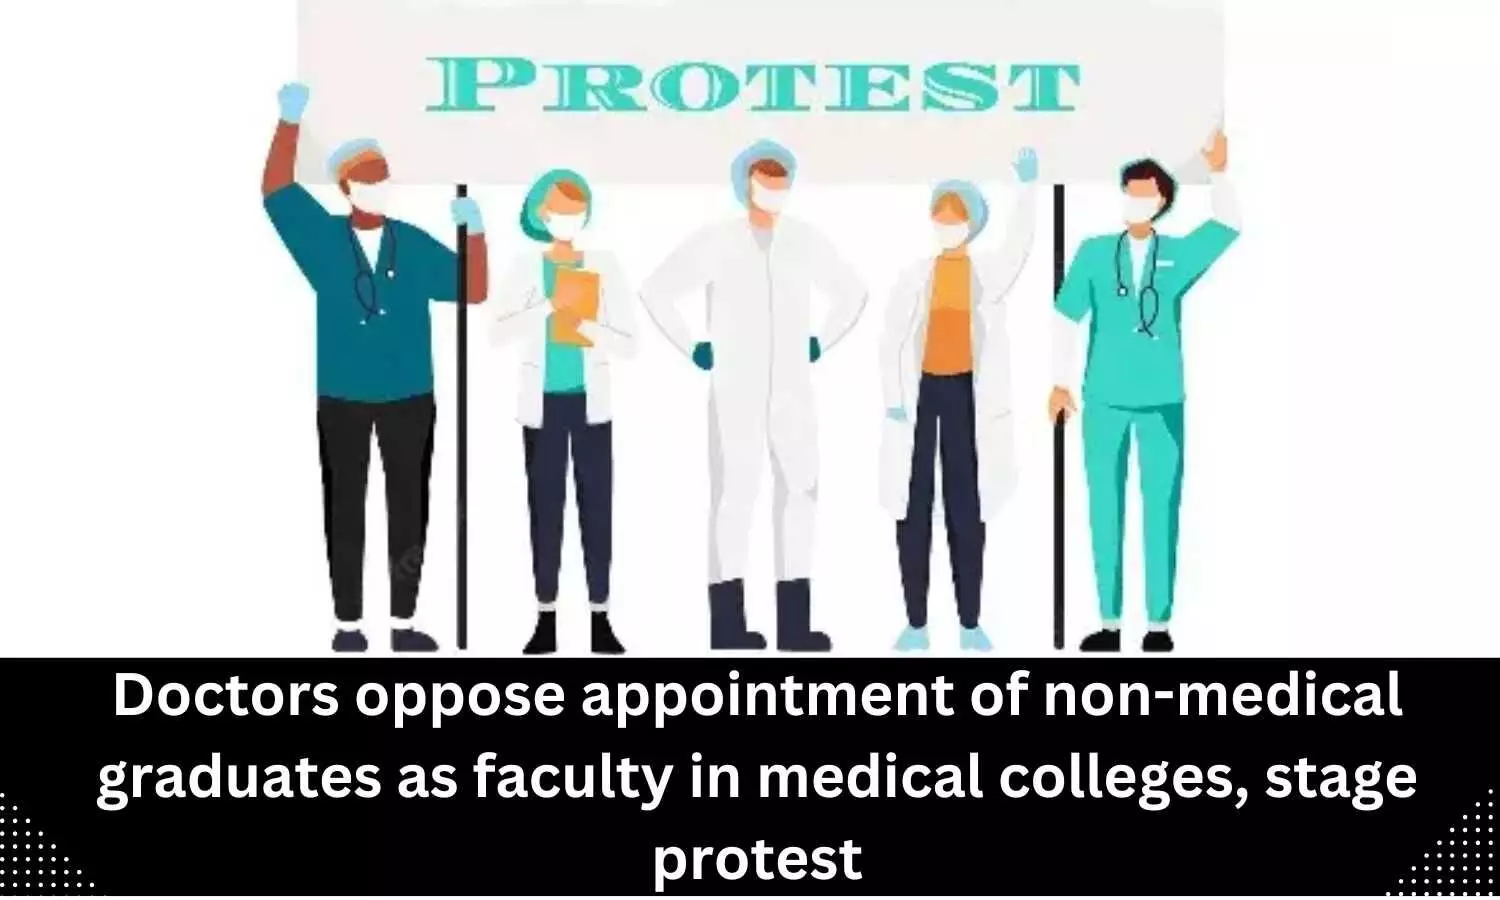 Appointment of non-medical graduates as faculty in medical colleges opposed by doctors, protest staged